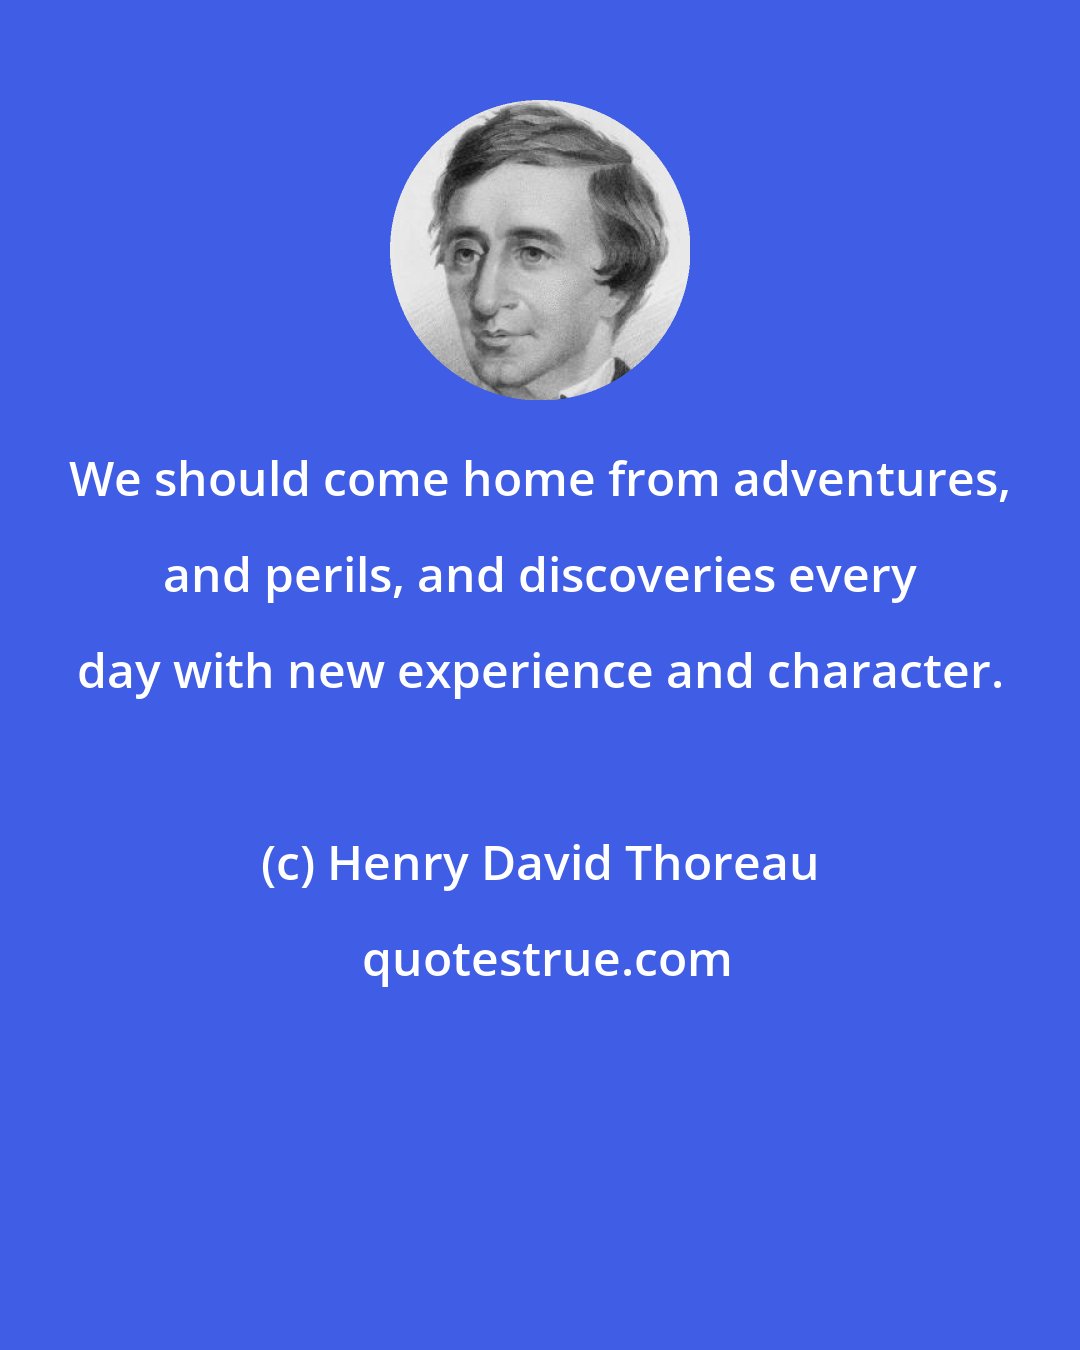 Henry David Thoreau: We should come home from adventures, and perils, and discoveries every day with new experience and character.